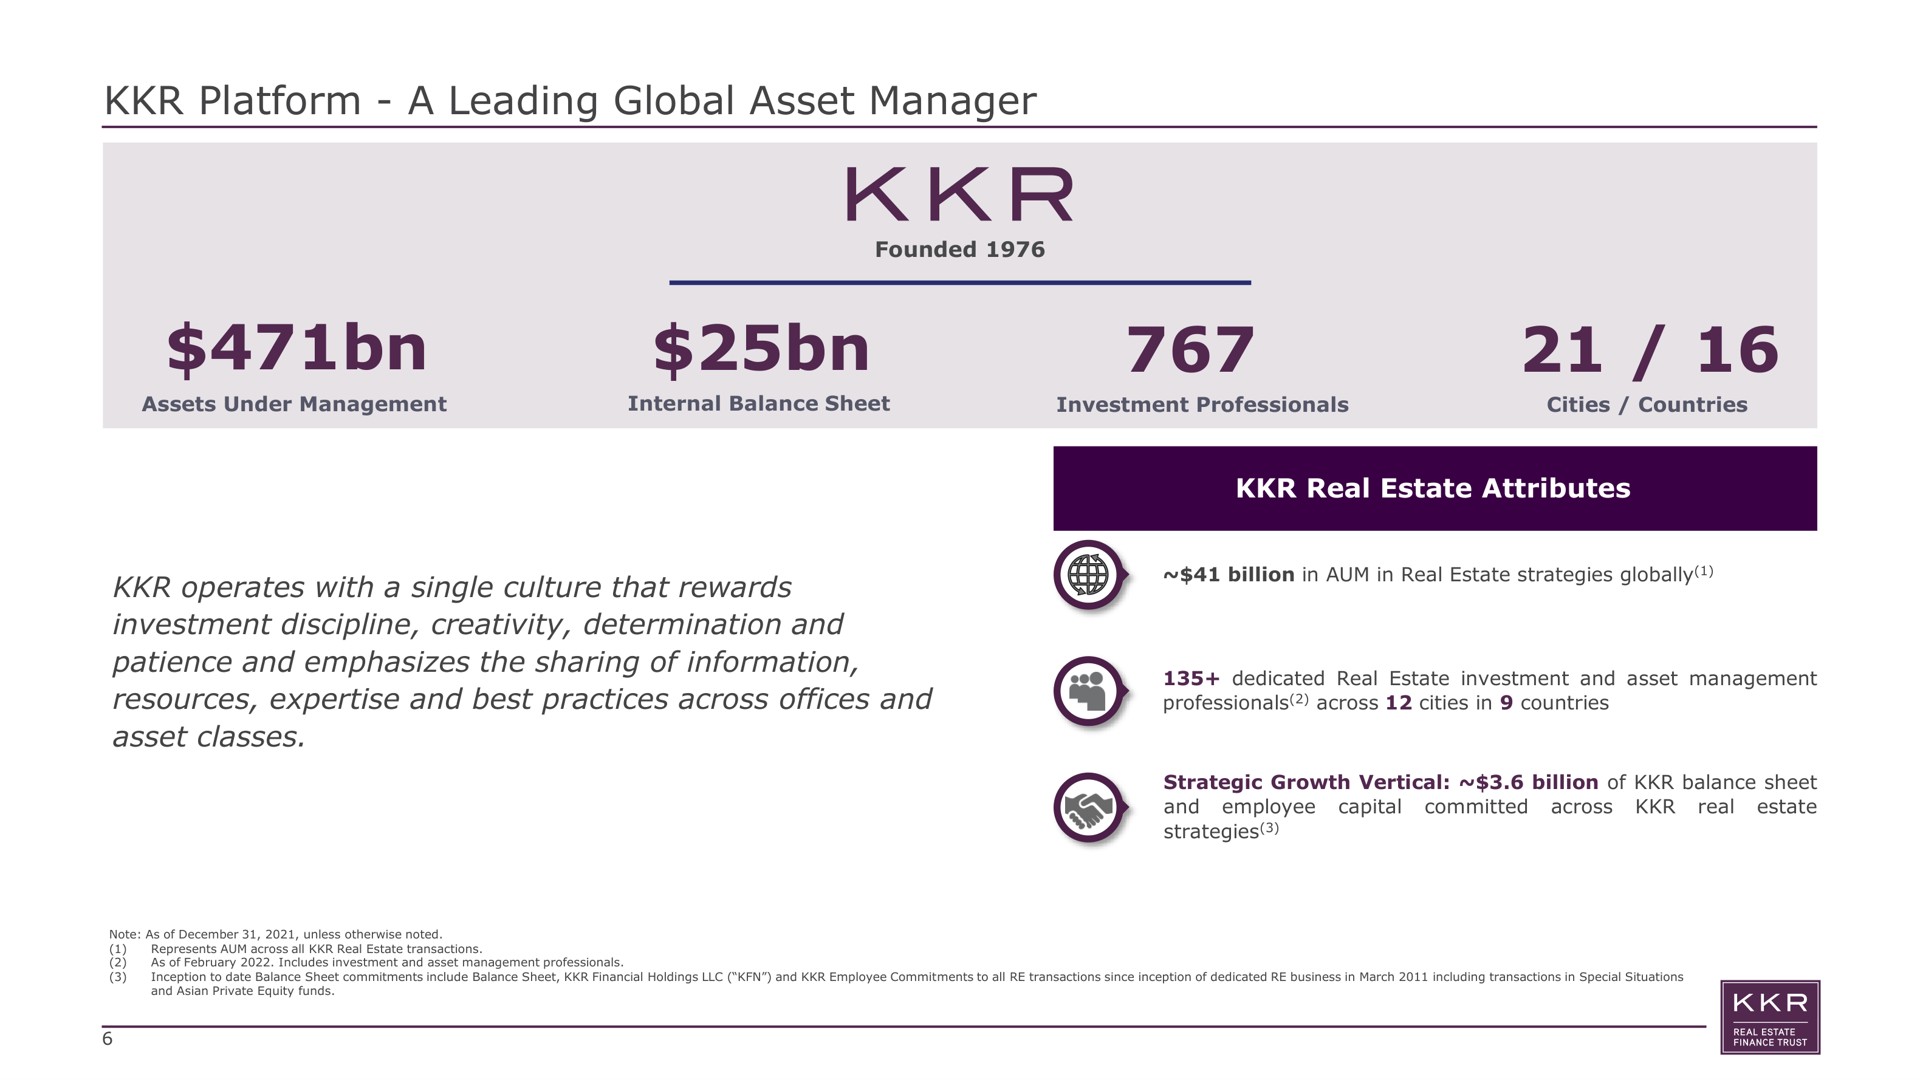 platform a leading global asset manager attributes real estate attributes operates with a single culture that rewards investment discipline creativity determination and patience and emphasizes the sharing of information resources and best practices across offices and asset classes | KKR Real Estate Finance Trust